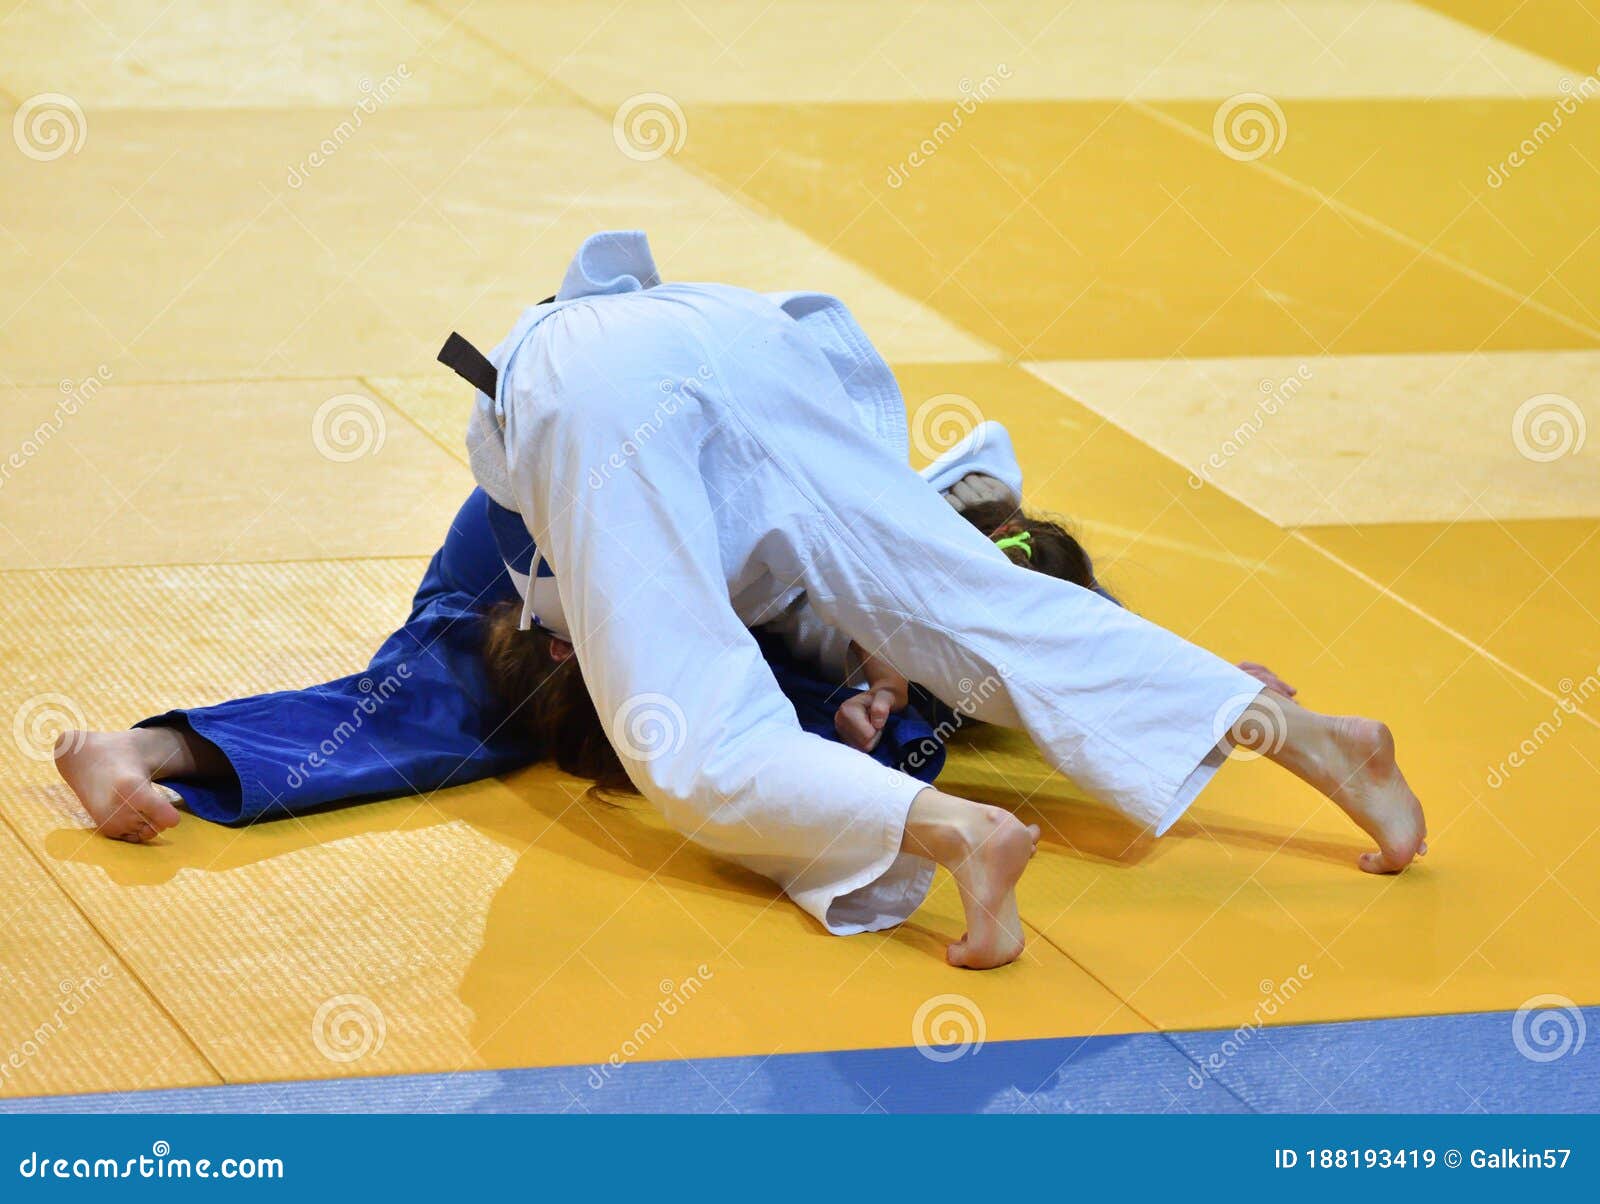 Girls compete in Judo stock image. Image of health, active - 188193419